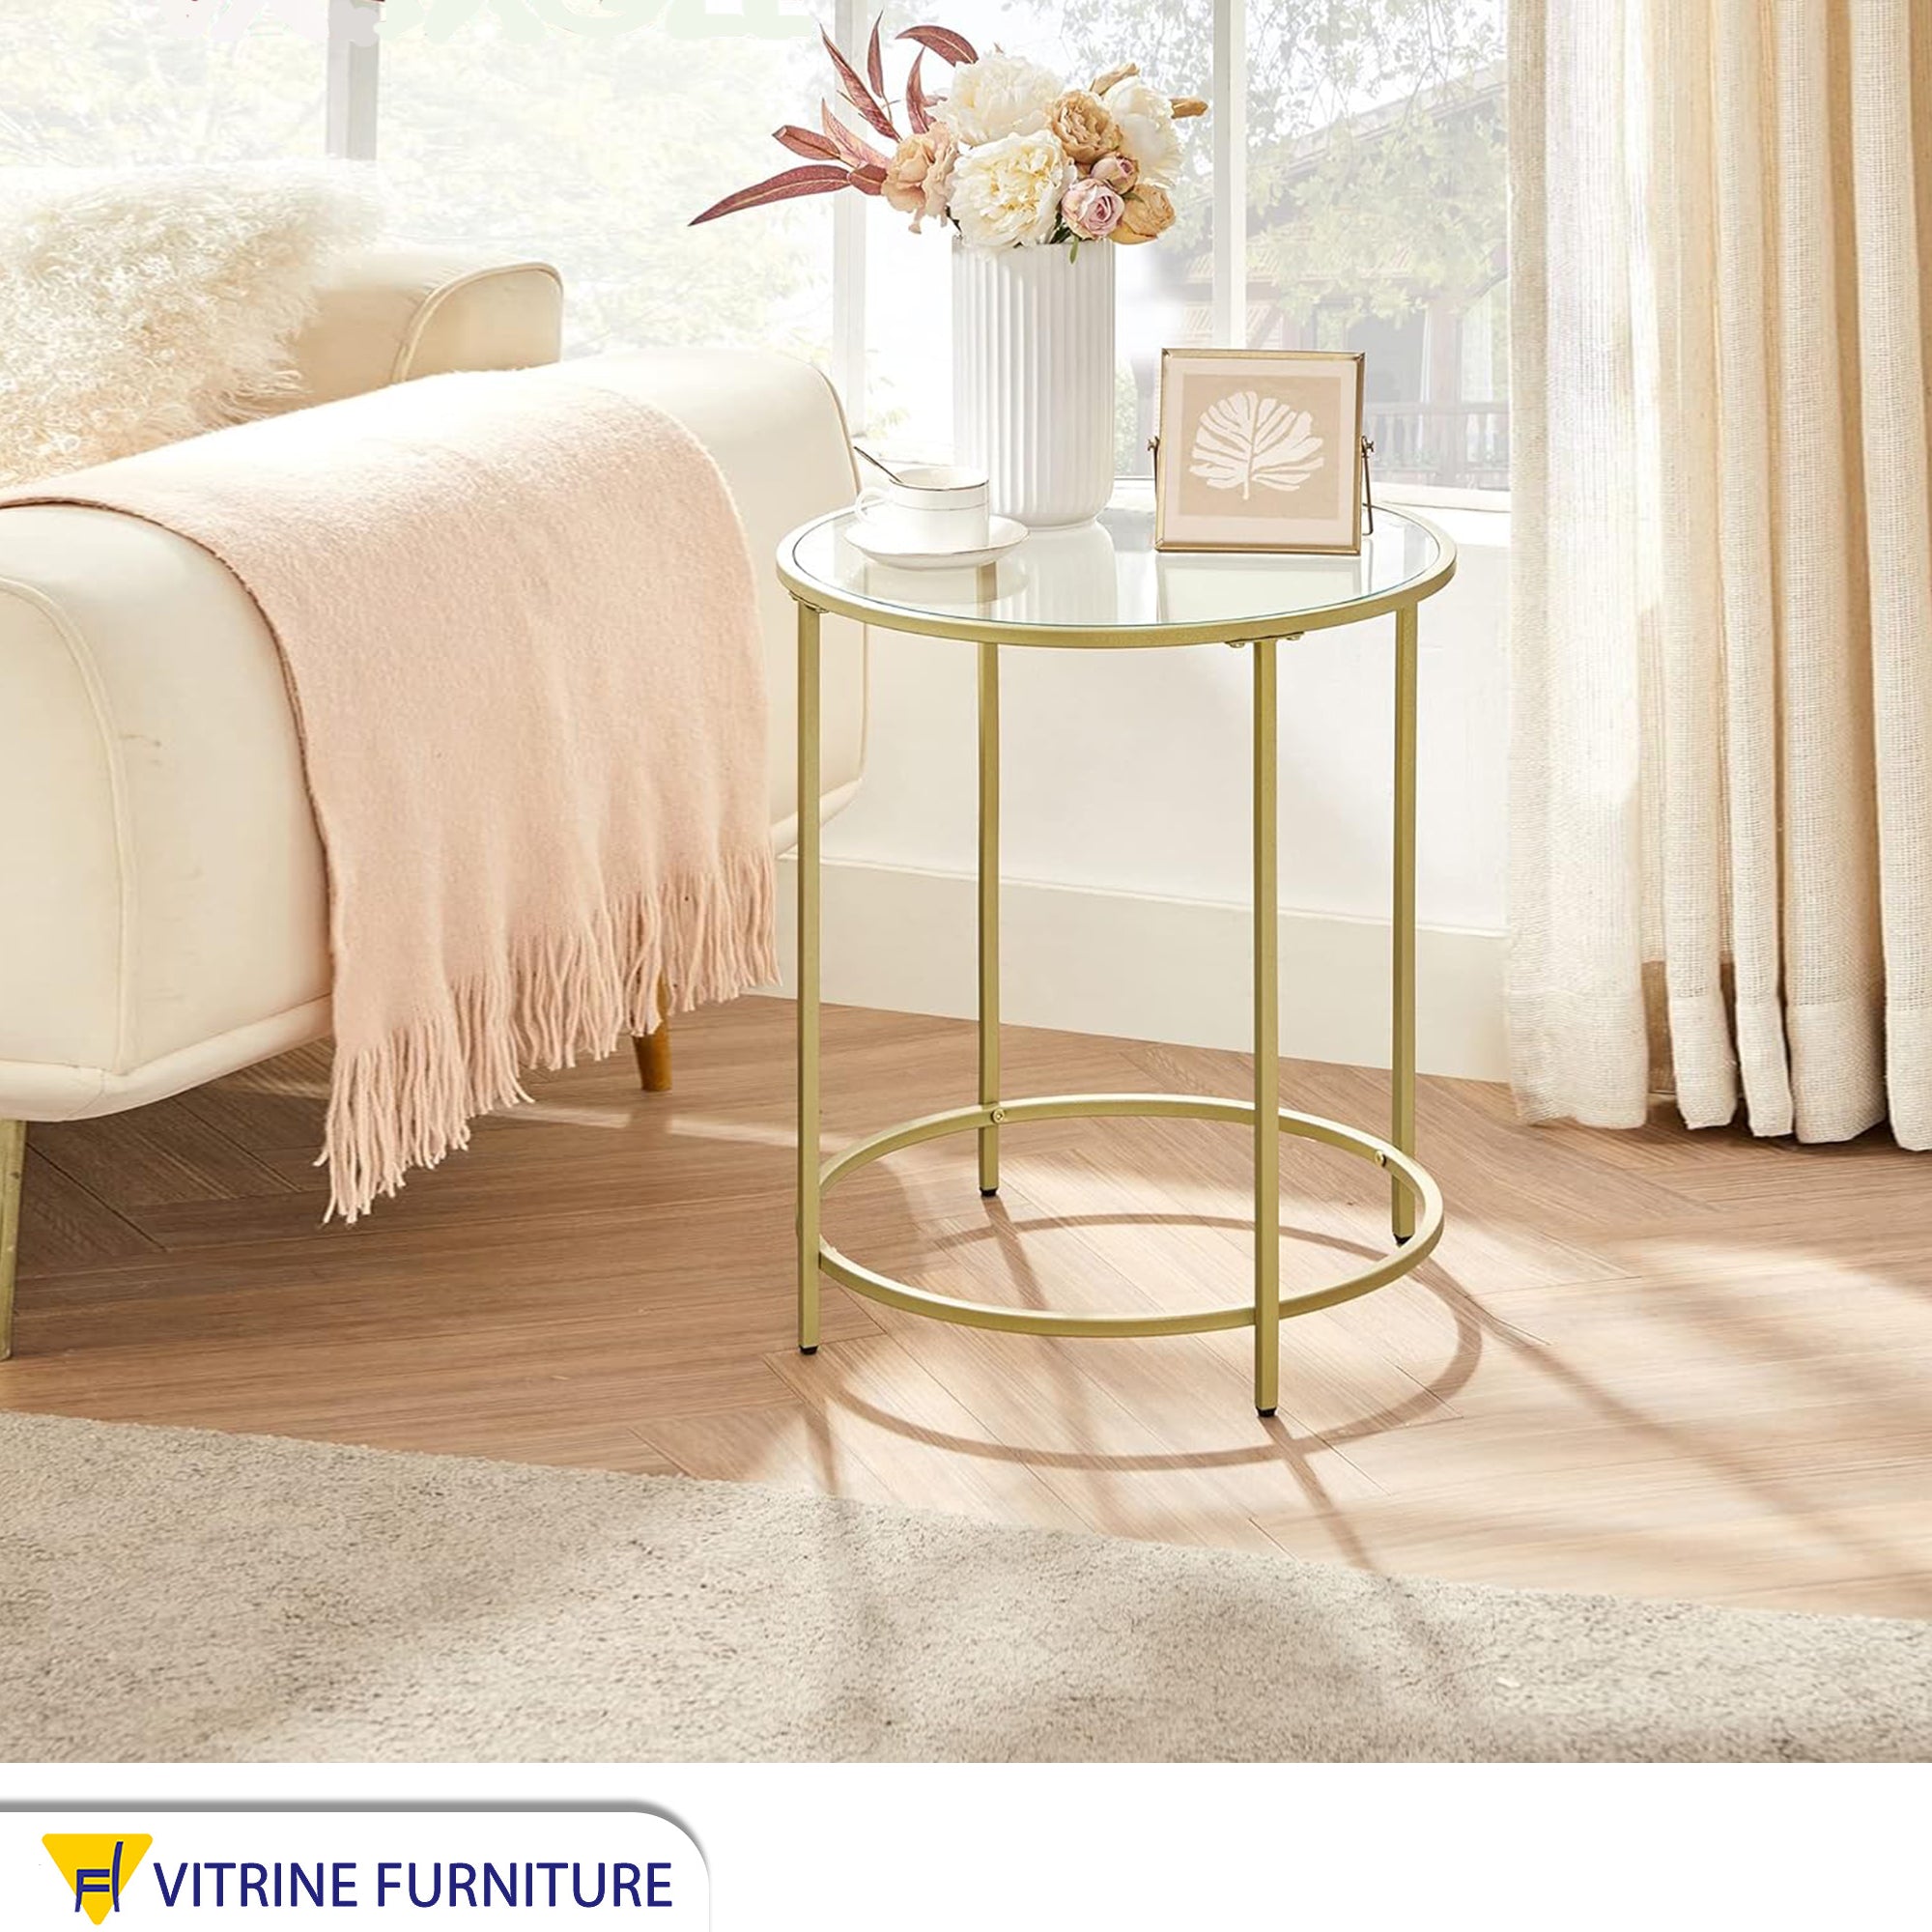 Side table with a circular structure